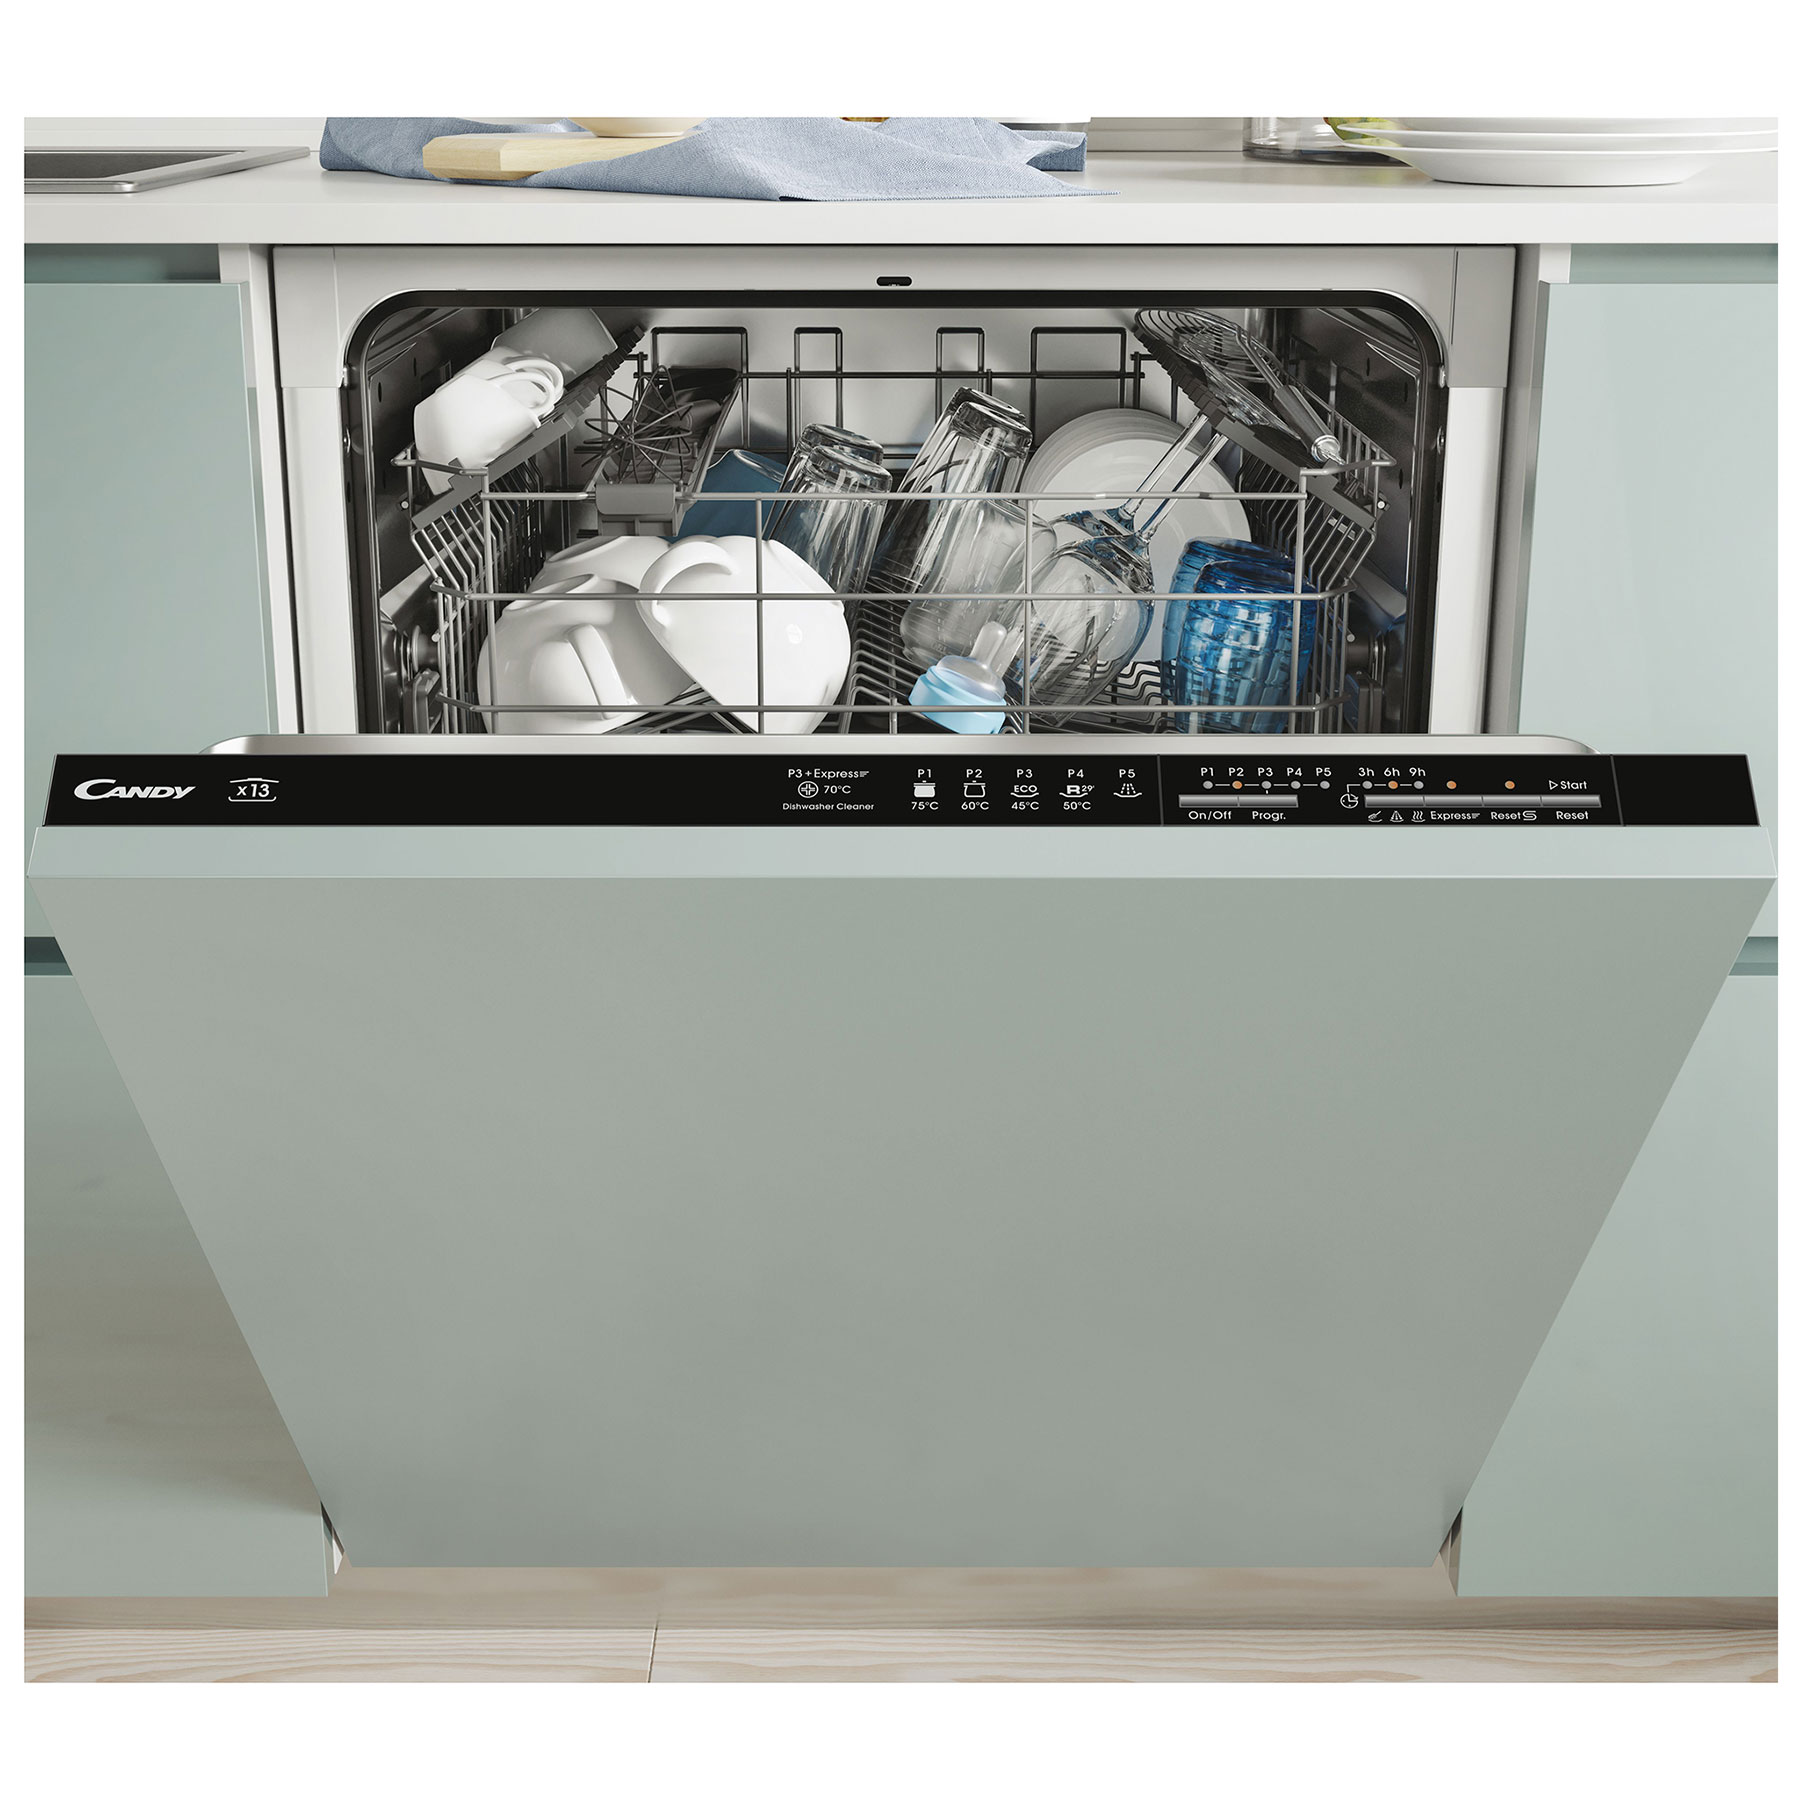 Image of Candy CI3D53L0B0 60cm Fully Integrated Dishwasher 13 Place F Rated